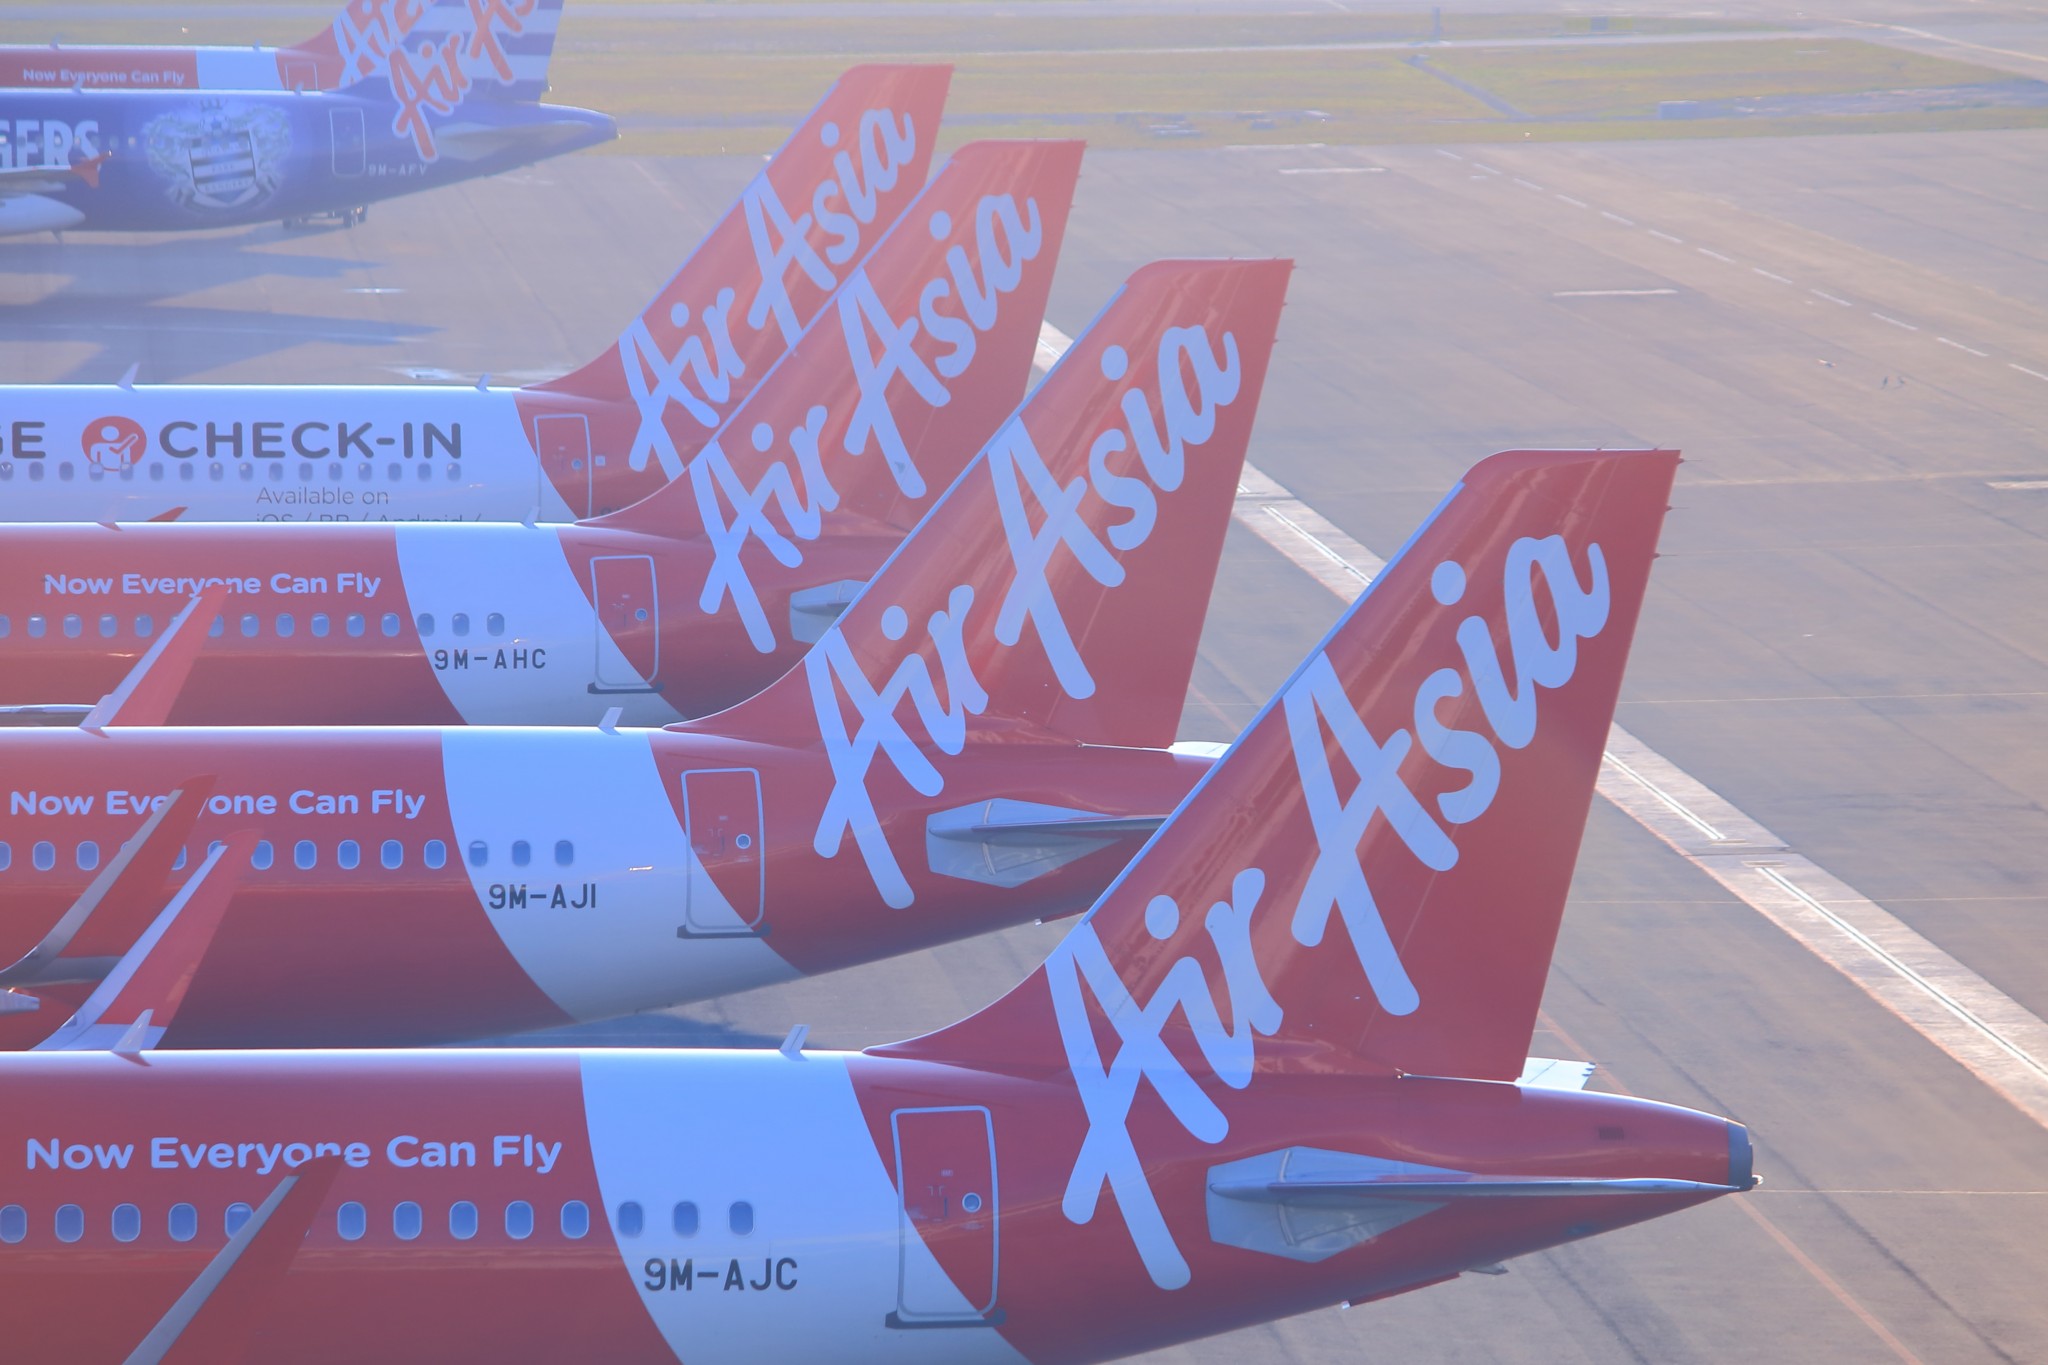 Fly Leasing’s acquisition approved AirAsia shareholders